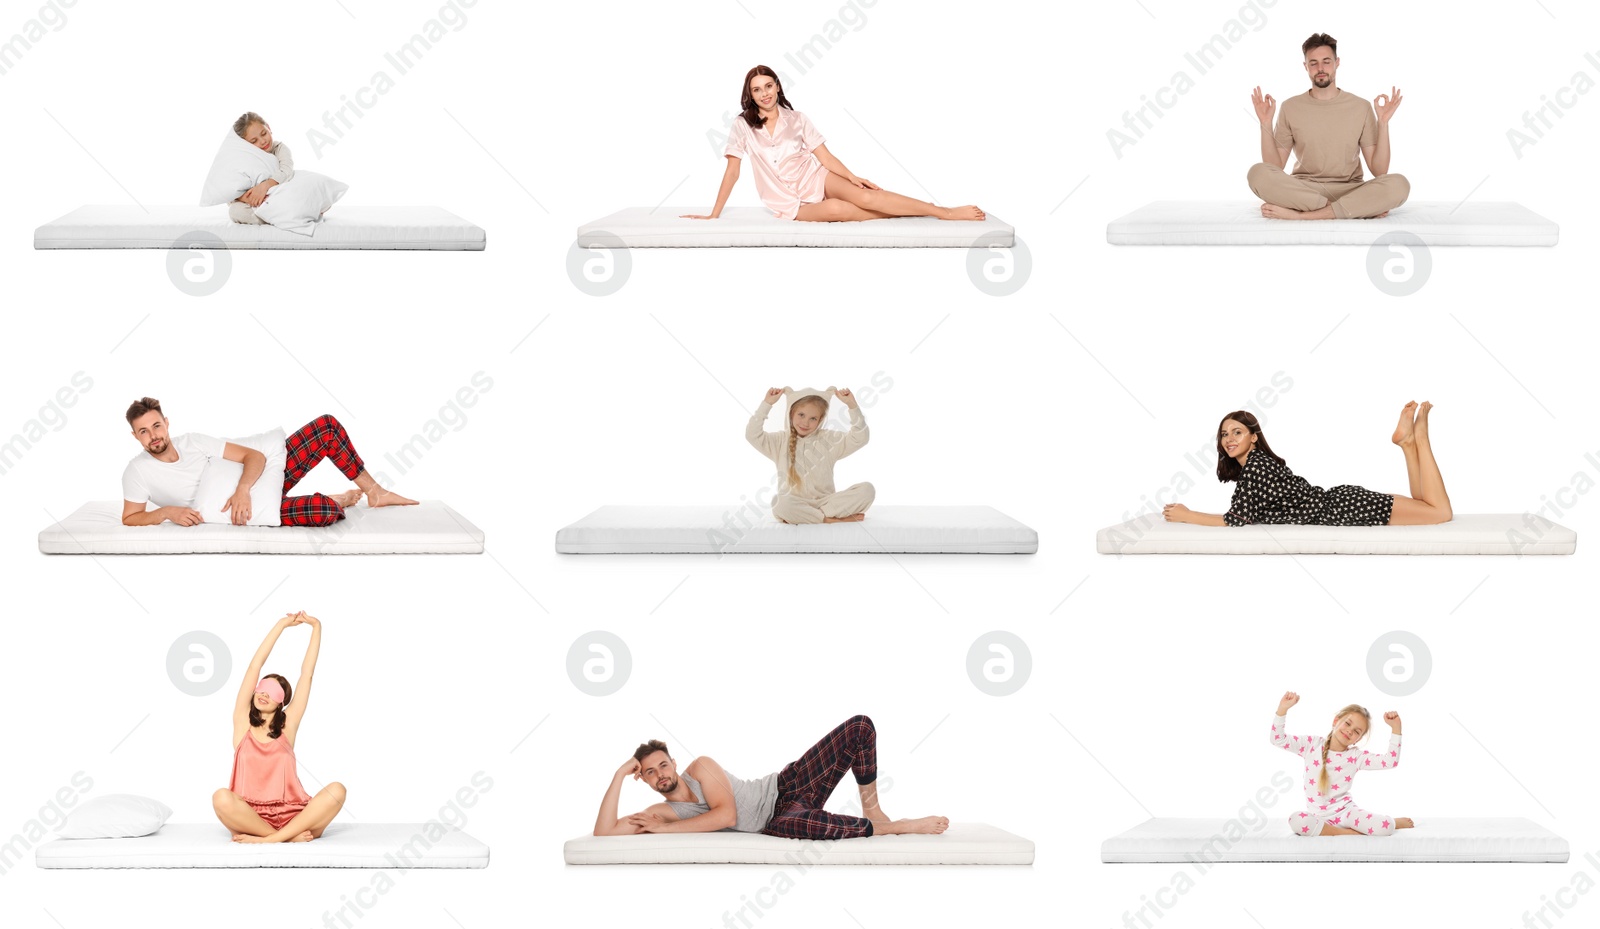 Image of Collage with photos of people on soft comfortable mattresses on white background